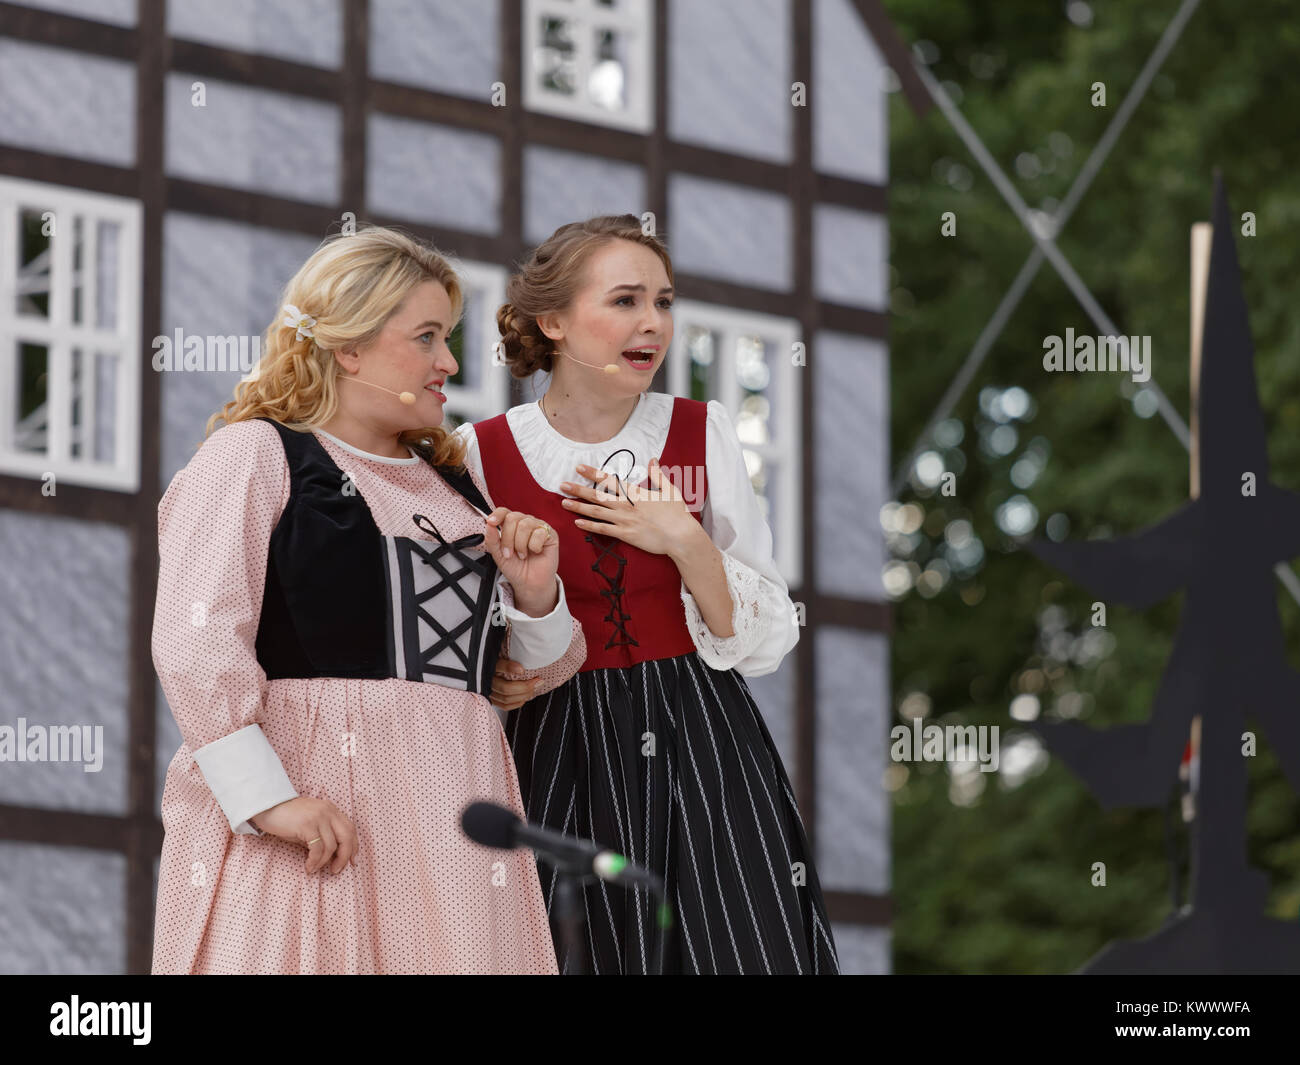 St. Petersburg, Russia - July 19, 2017: Micaela di Catalano (left) and Olga Cheremnykh in the opera The Marksman of C. M. von Weber outdoors during th Stock Photo